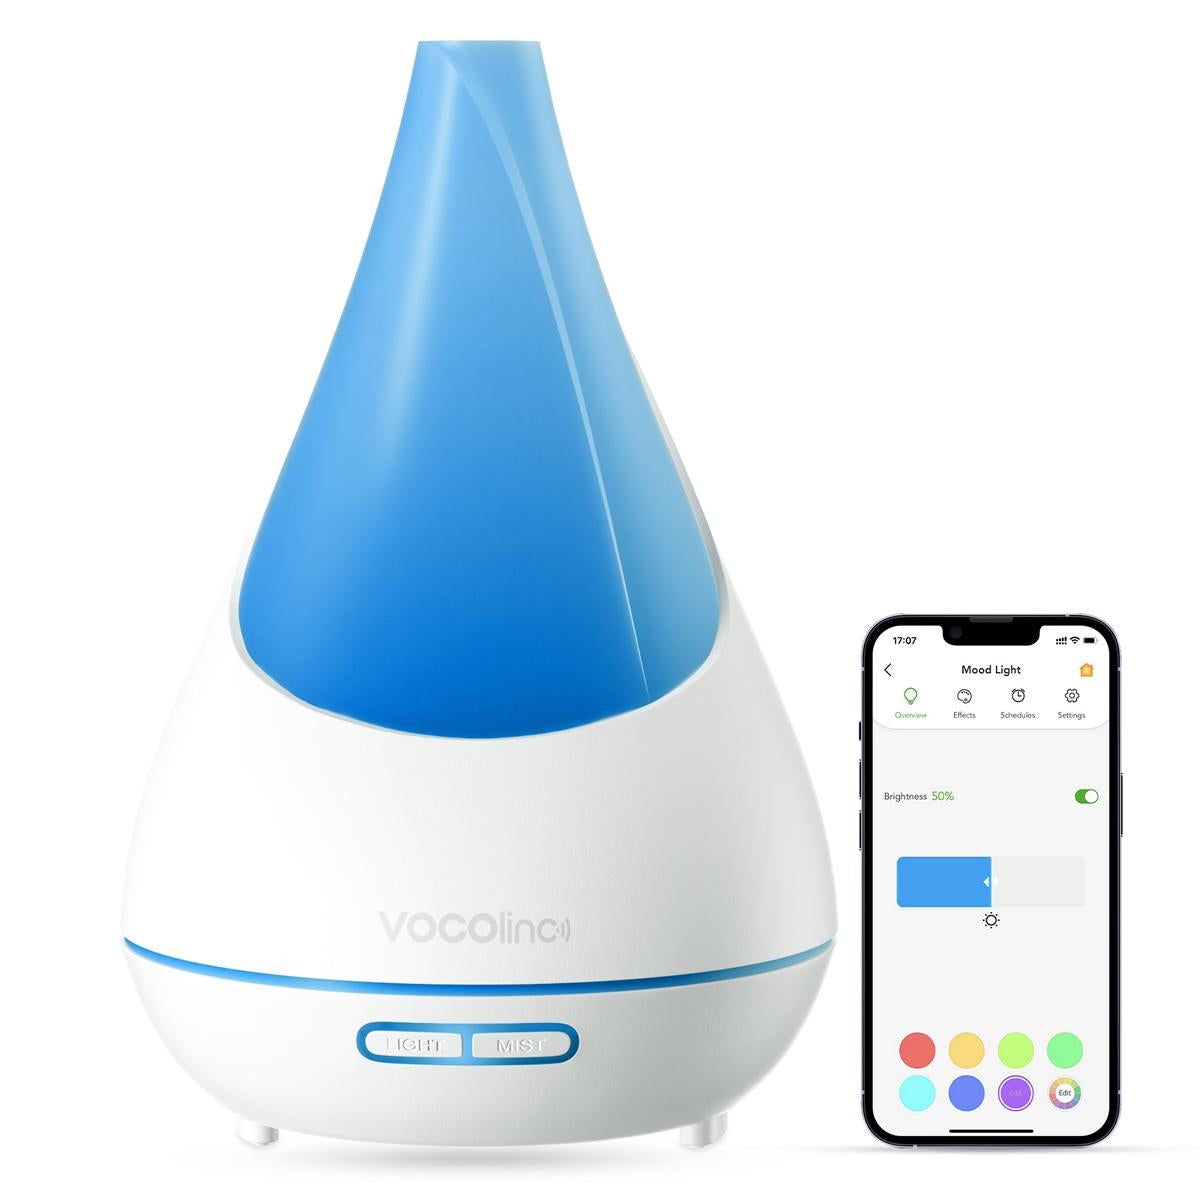 [Ensure Your Safety and Satisfaction] This aromatherapy diffuser is made of BPA-free material, which is safe for you or your family. We hope you can read the manual carefully so you can use this diffuser quickly. If for any reason you are not completely satisfied, please contact us, we are at your service 24 hours a day!